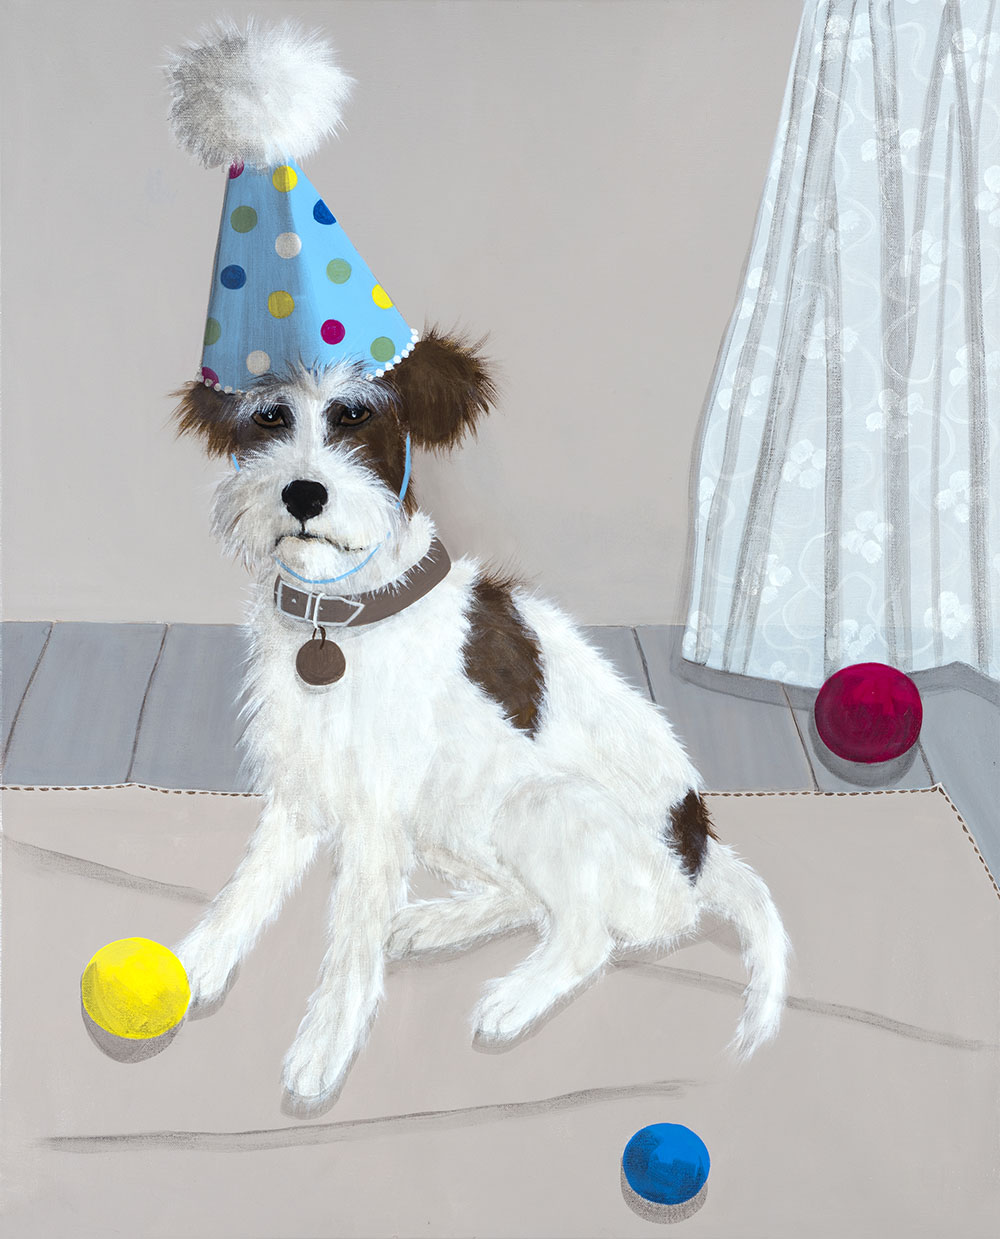 Mary Carlson paints quirky dogs